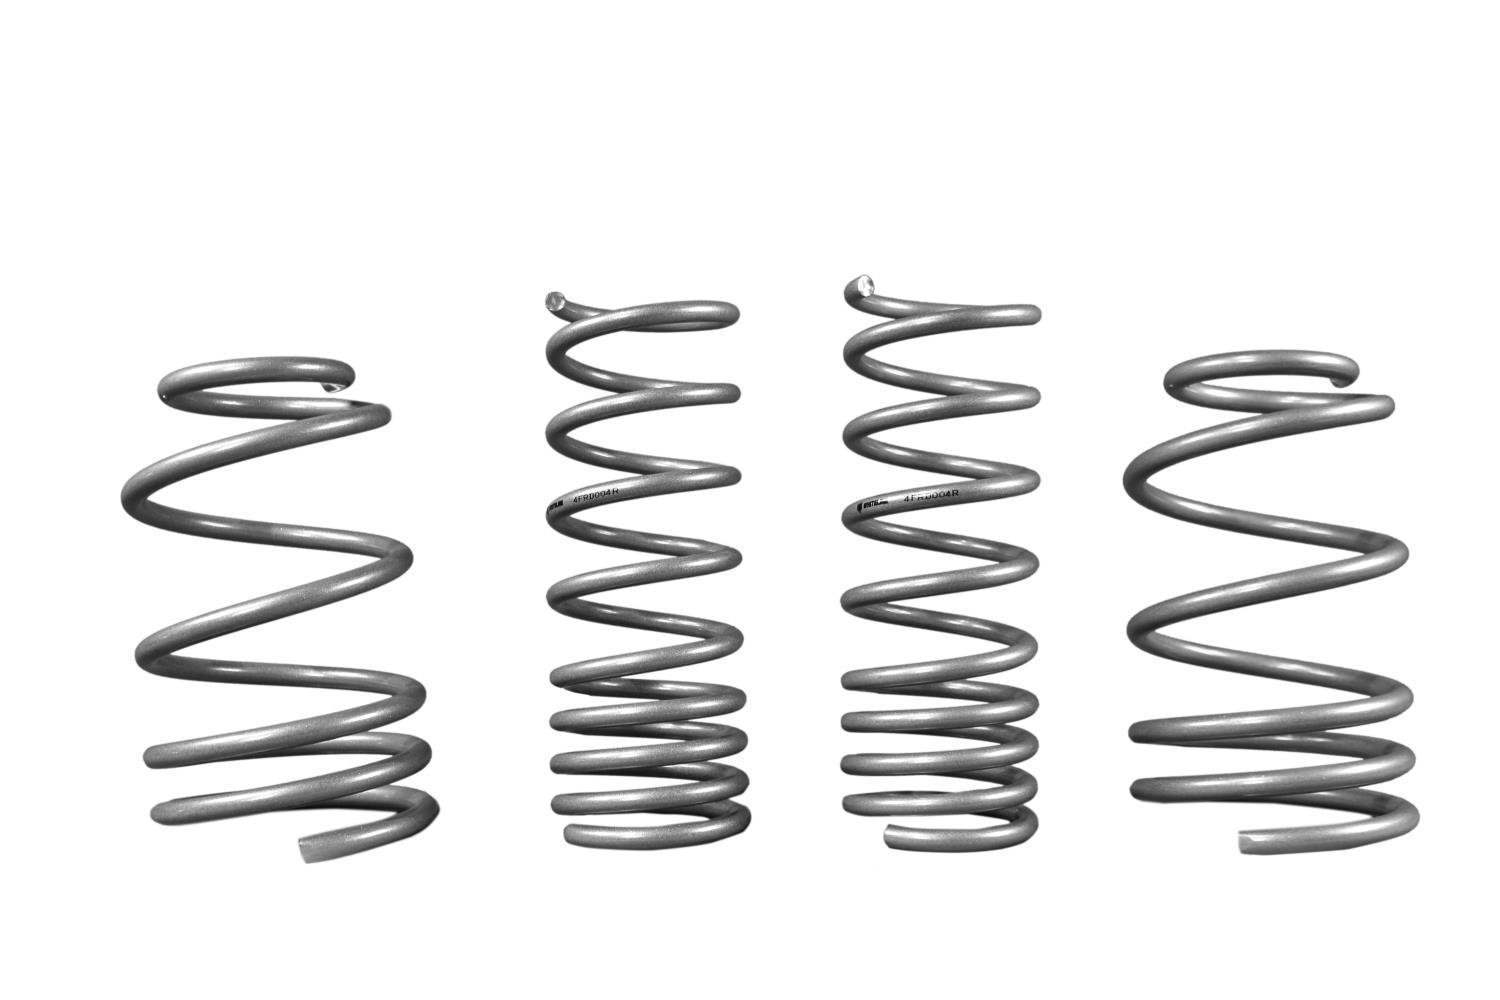 WSK-FRD004 Performance Lowering Springs for 2012-2013 Ford Focus